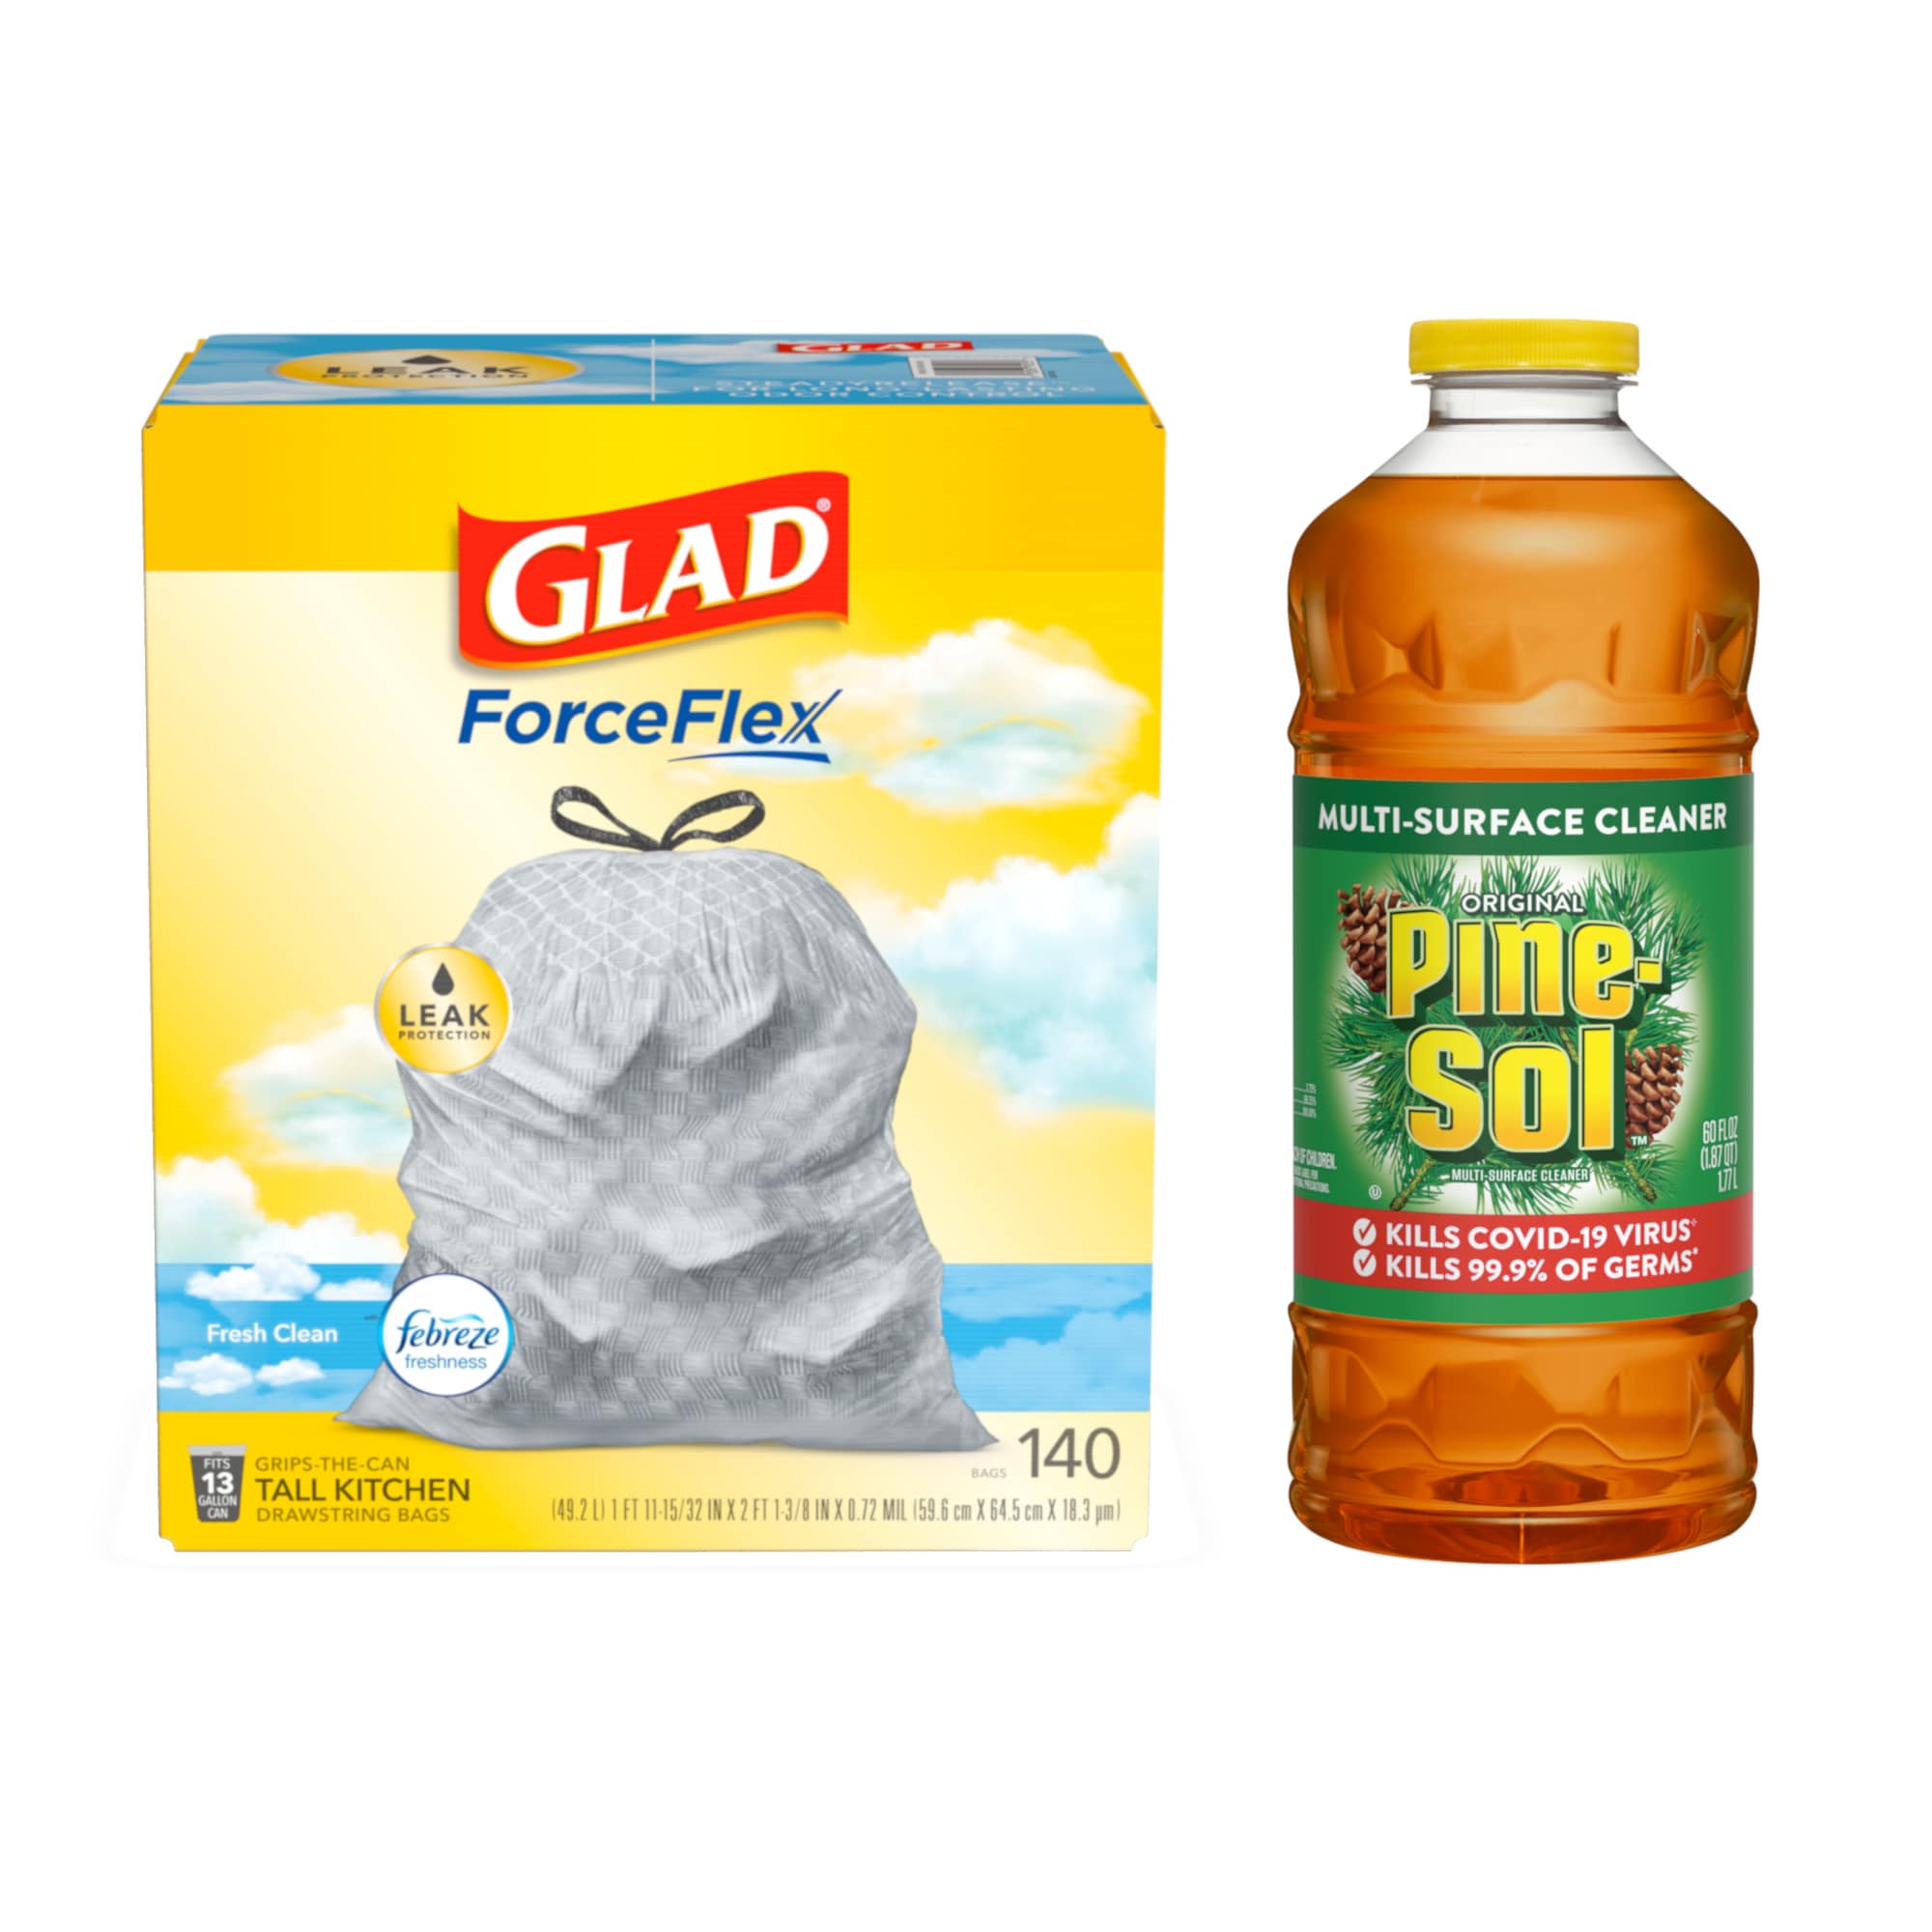 No more fighting your plastic wrap! Introducing NEW from Glad - a